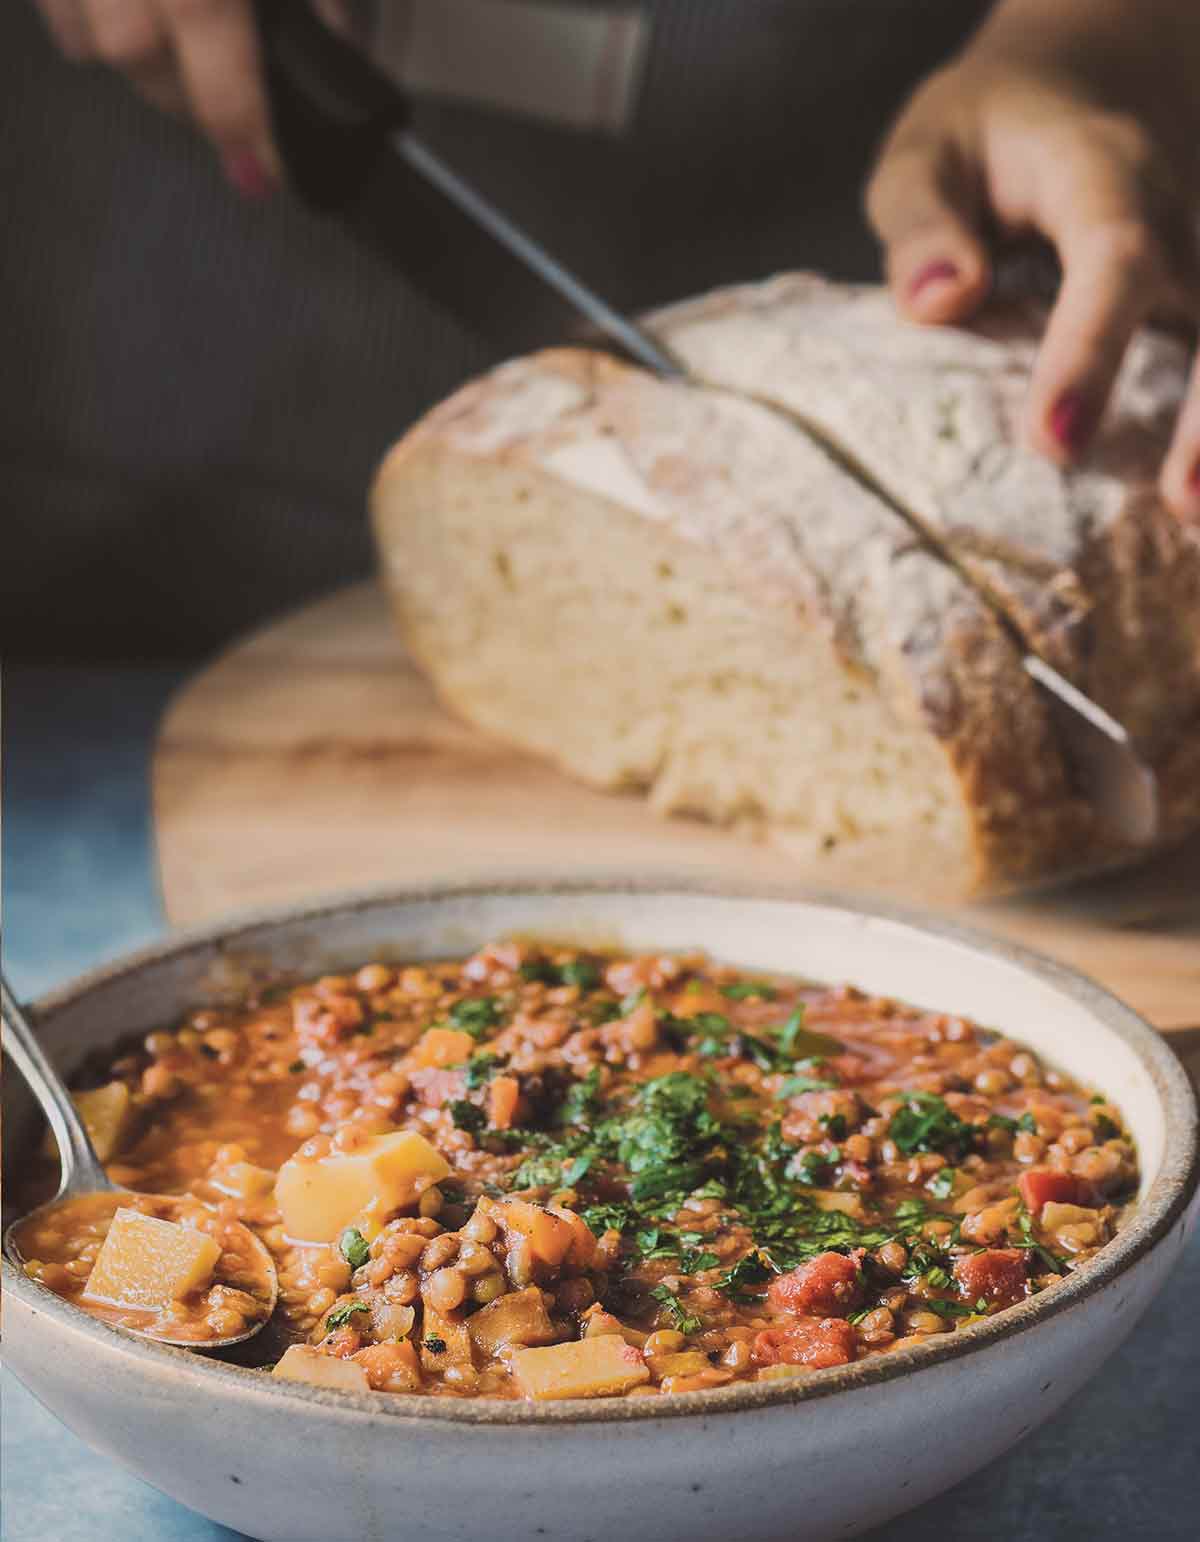 A bowl of Instant Pot lentil soup, with a person cutting a slice of artisan bread in the background.